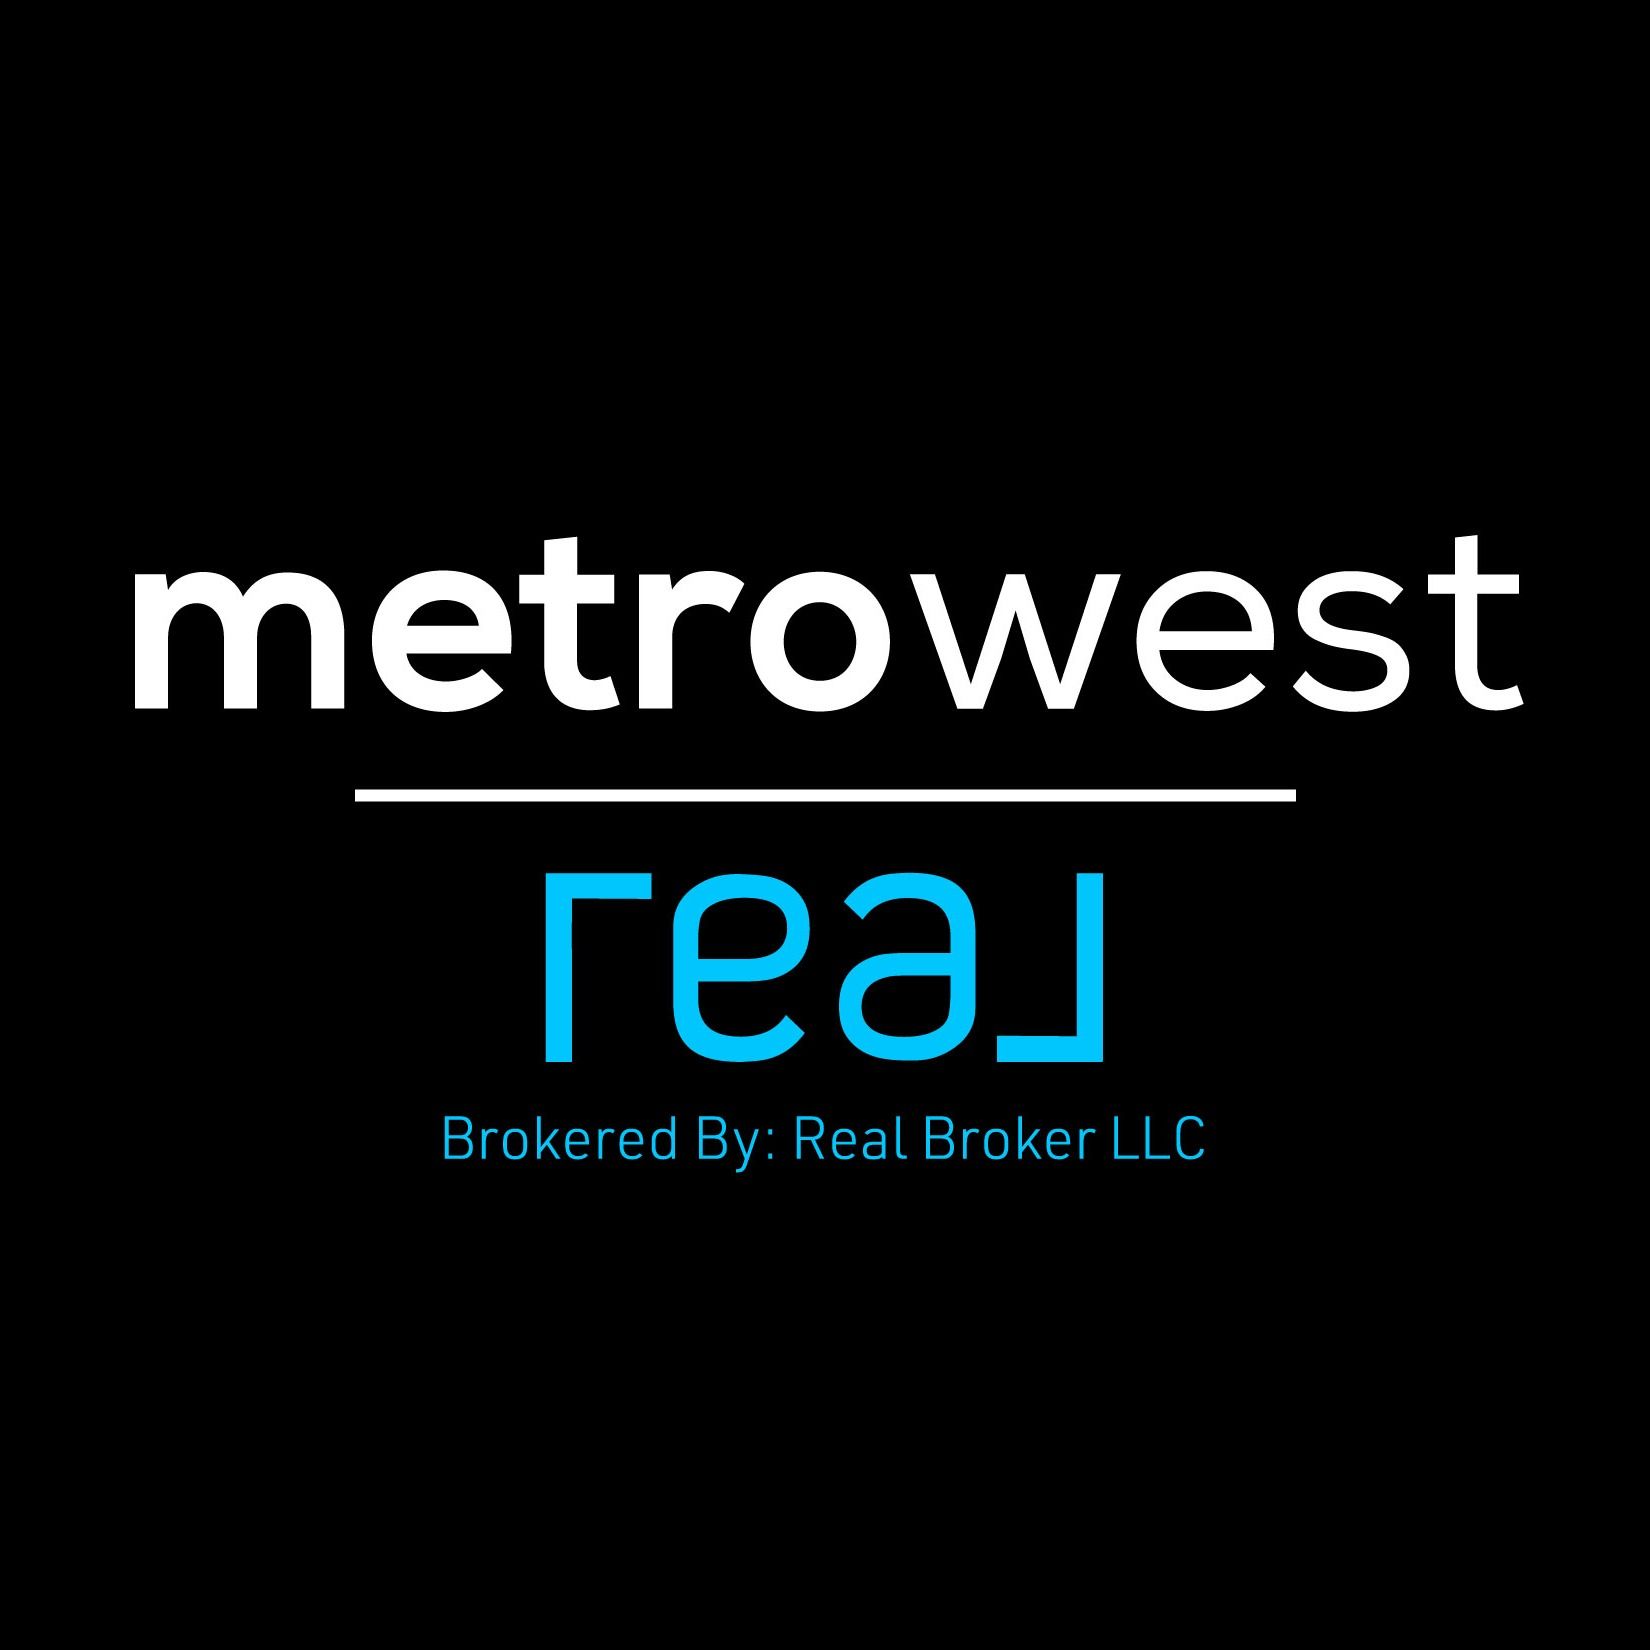 The Metrowest Team